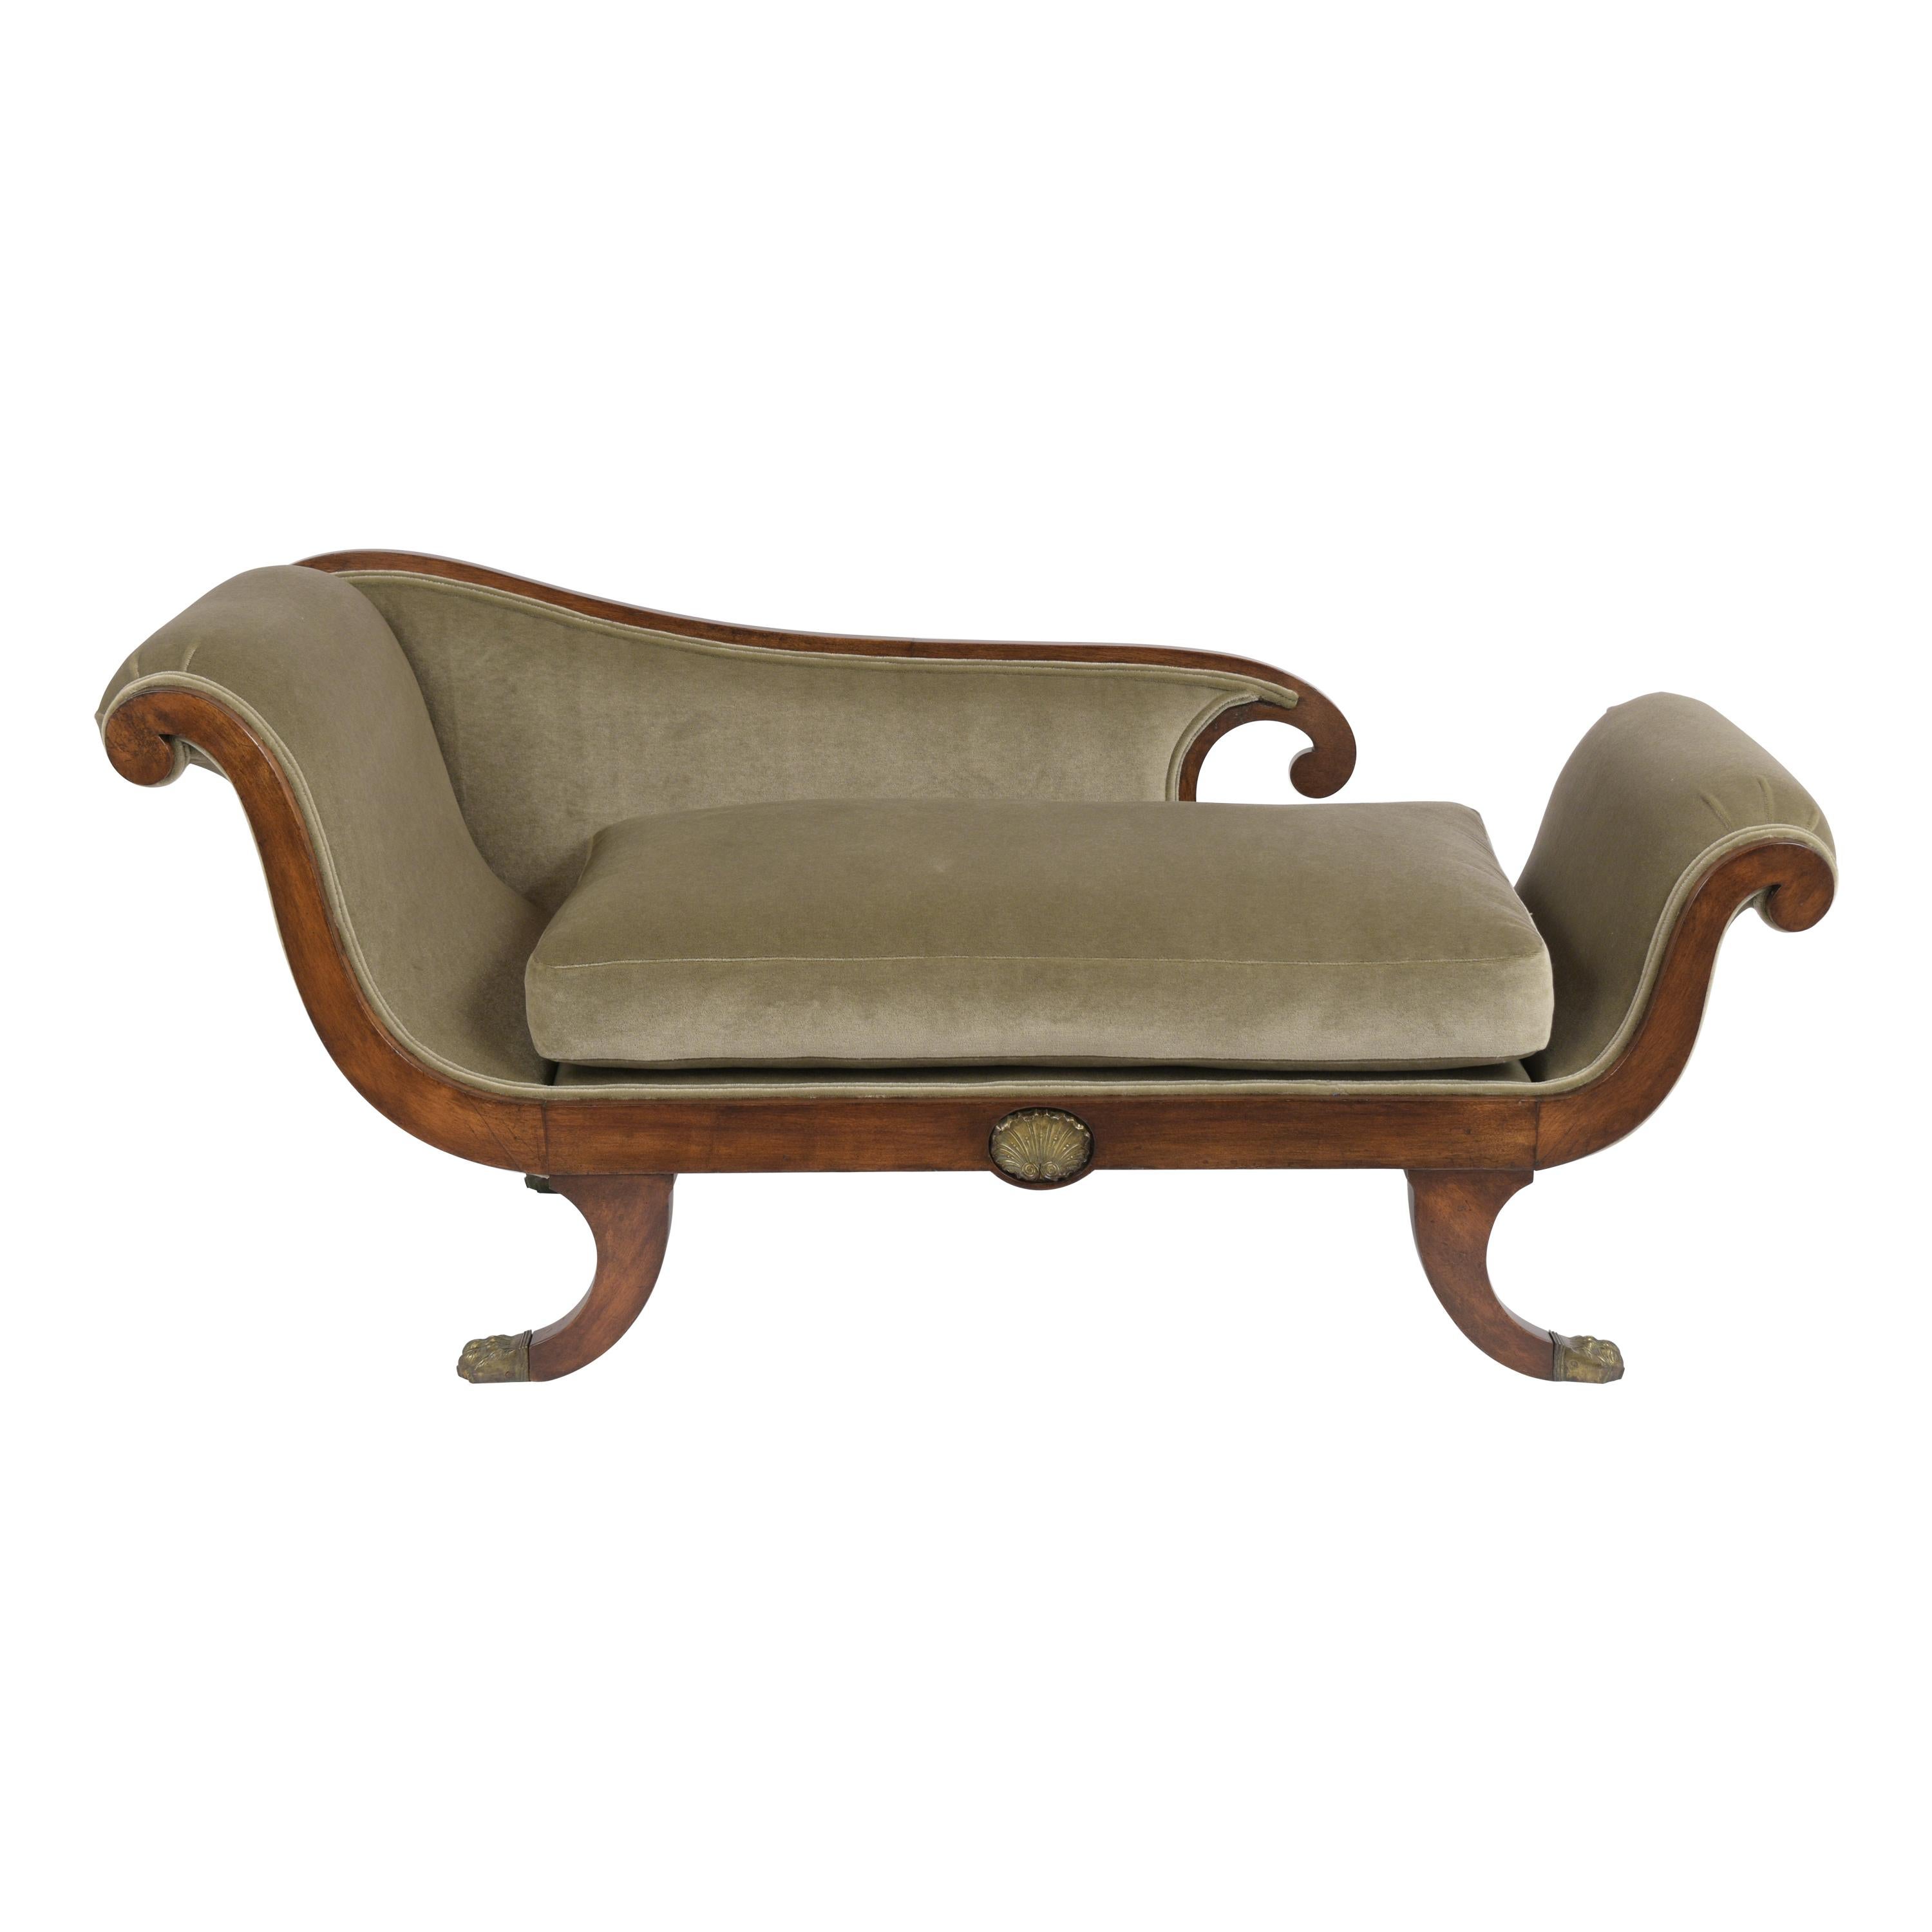 English 19th Century Empire Style Chaise Lounge